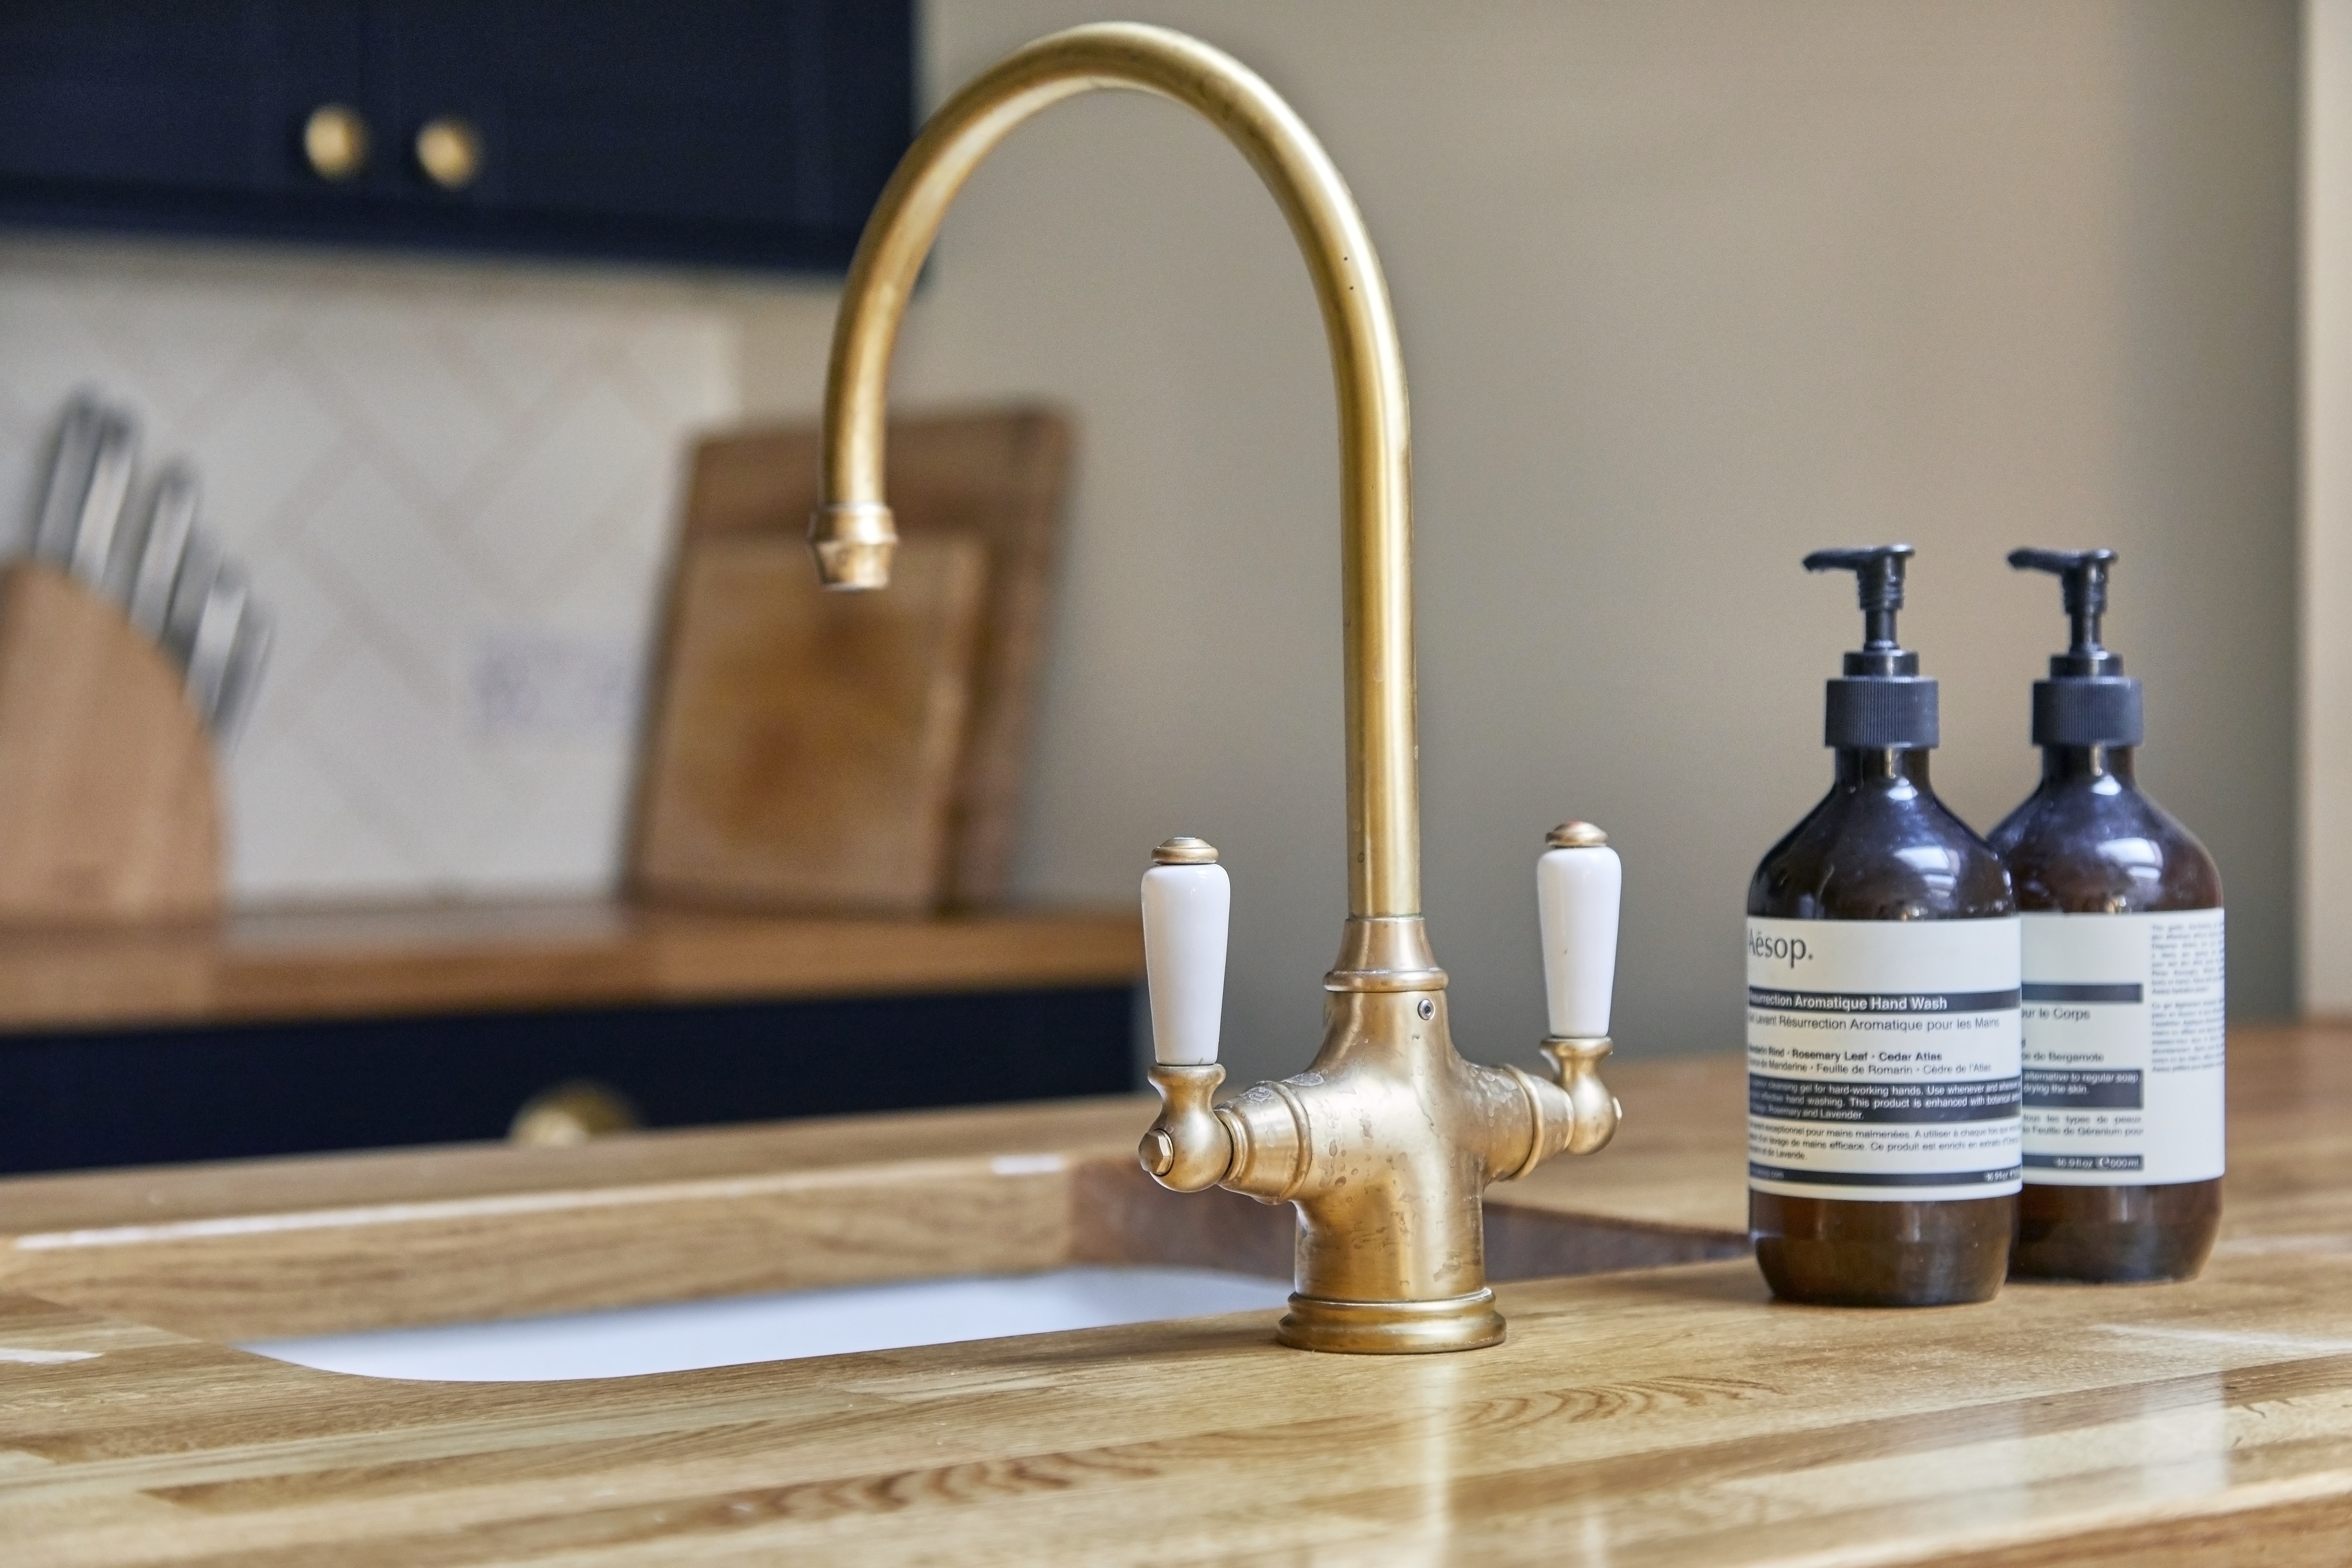 Perrin & Rowe traditional tap is part of this bespoke kitchen by Holland Street Kitchens.